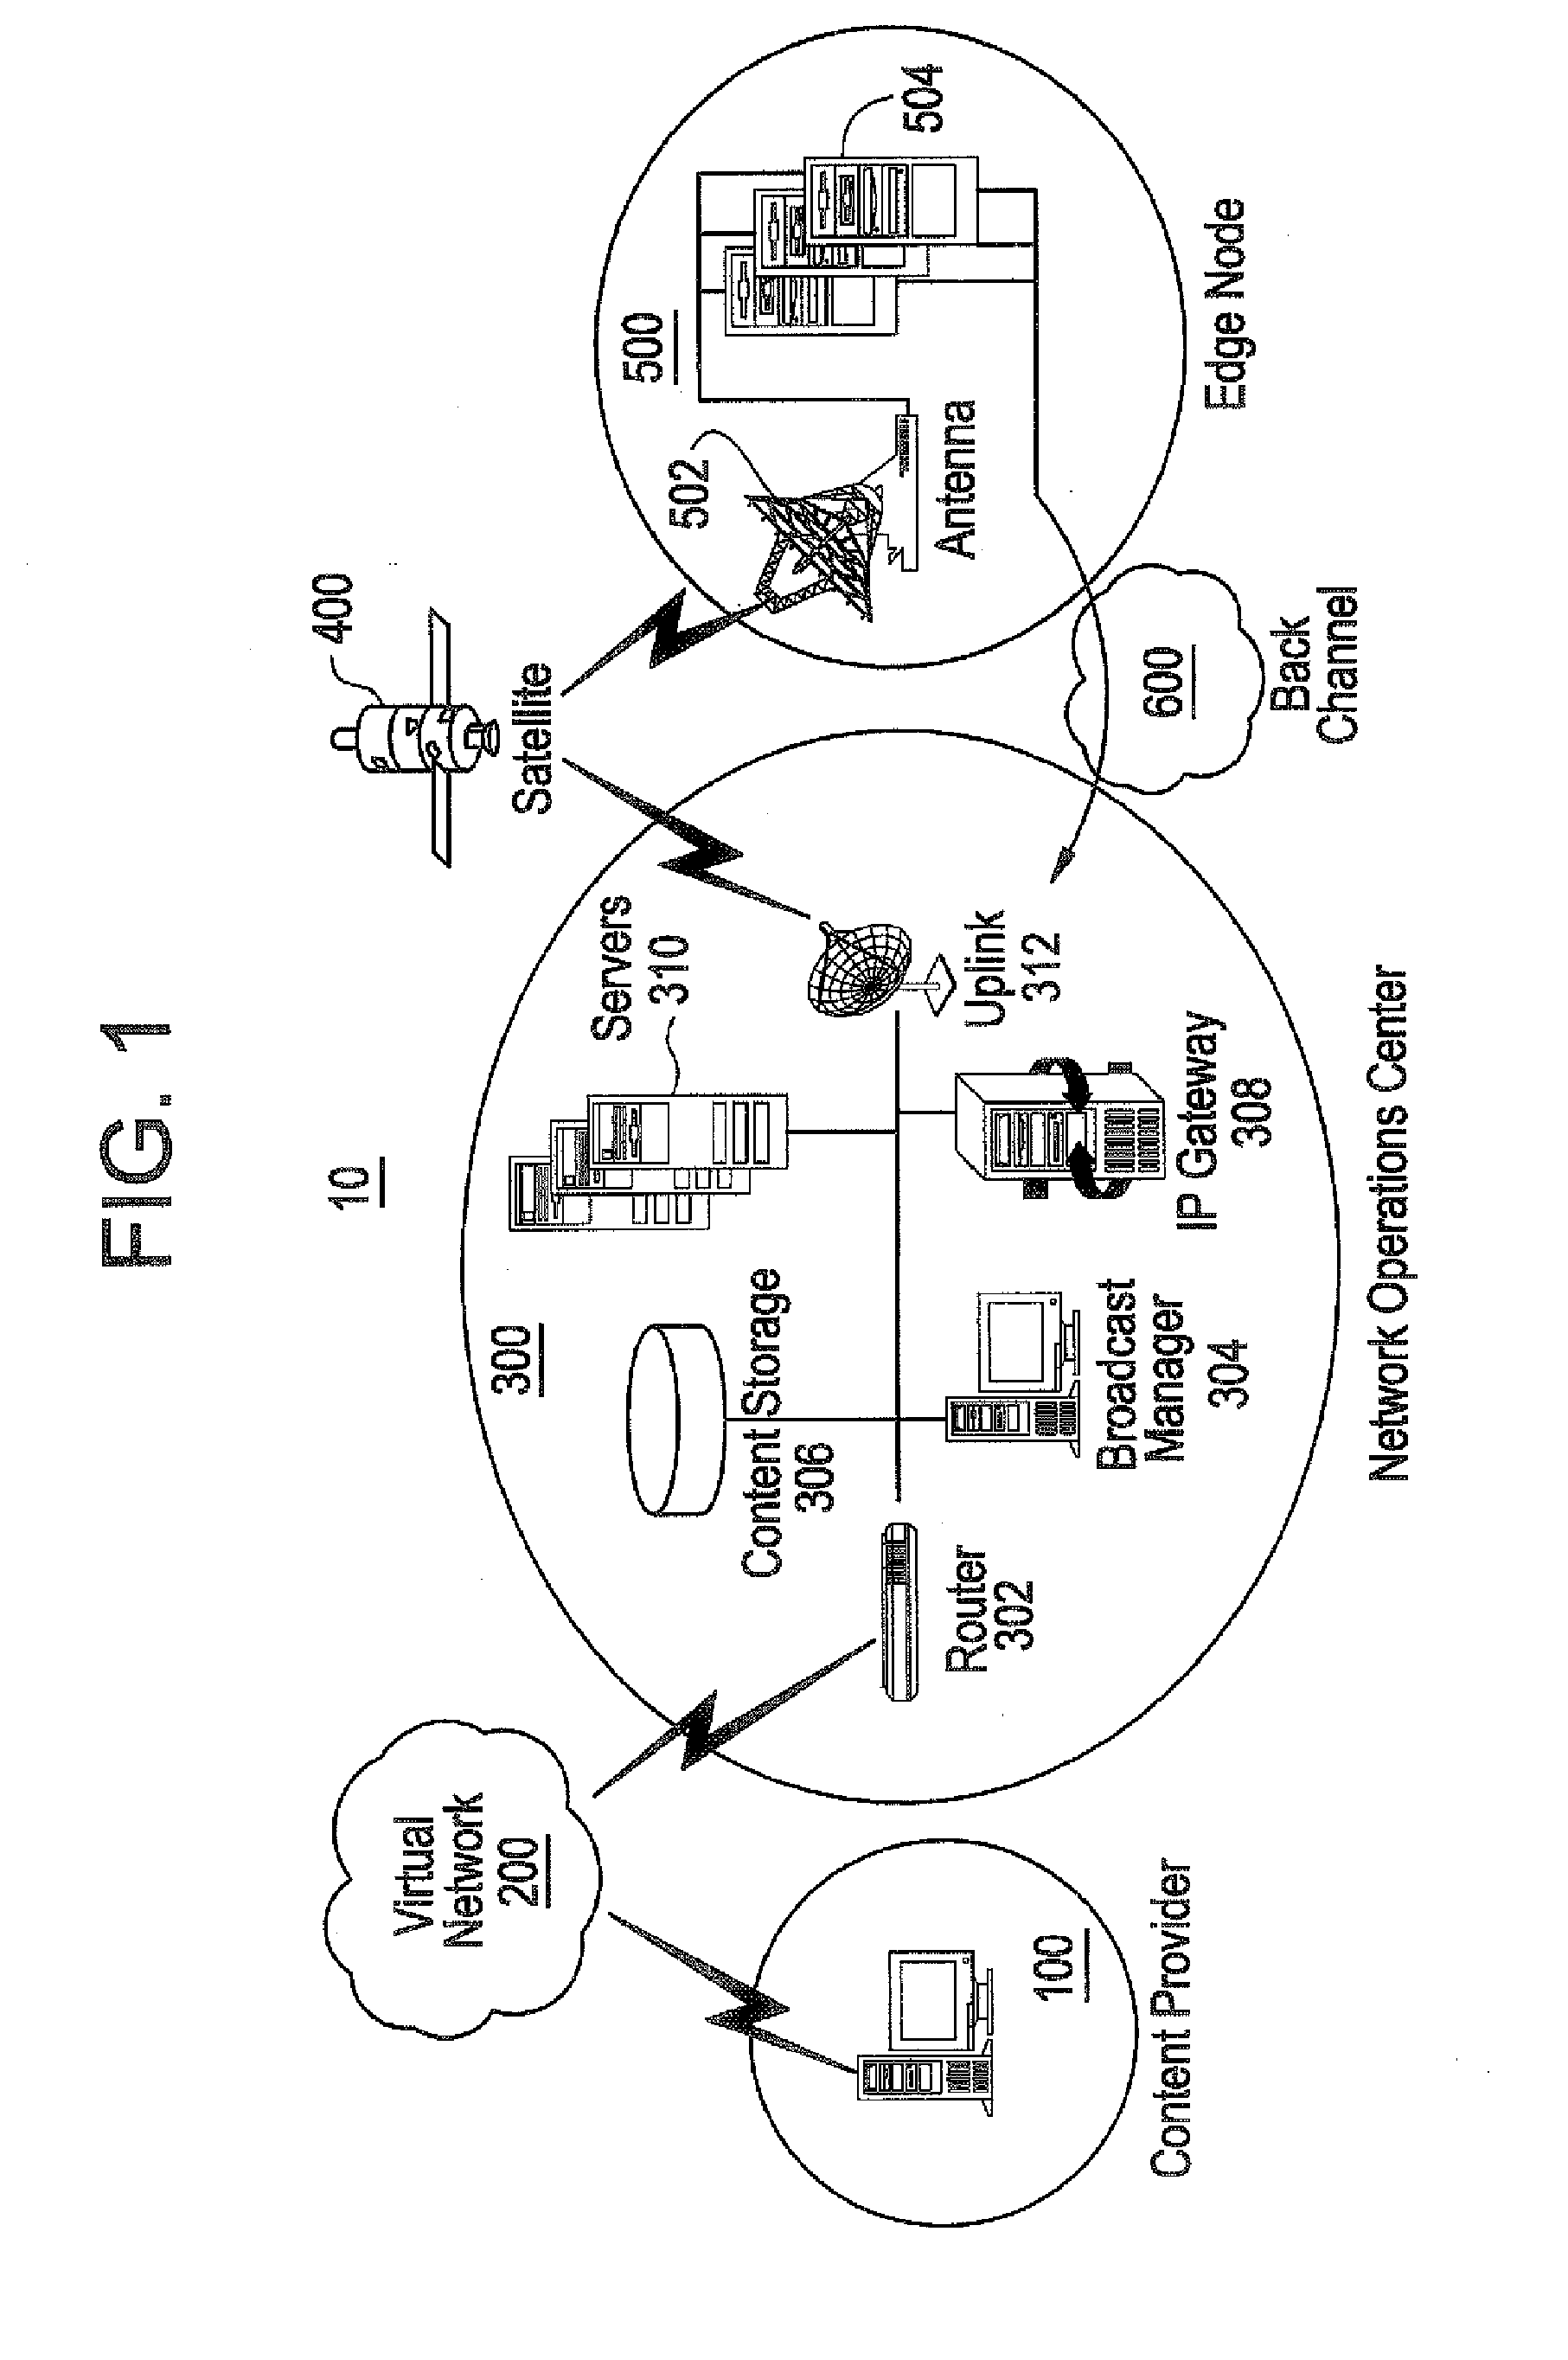 Network operation center architecture in a high bandwidth satellite based data delivery system for internet users